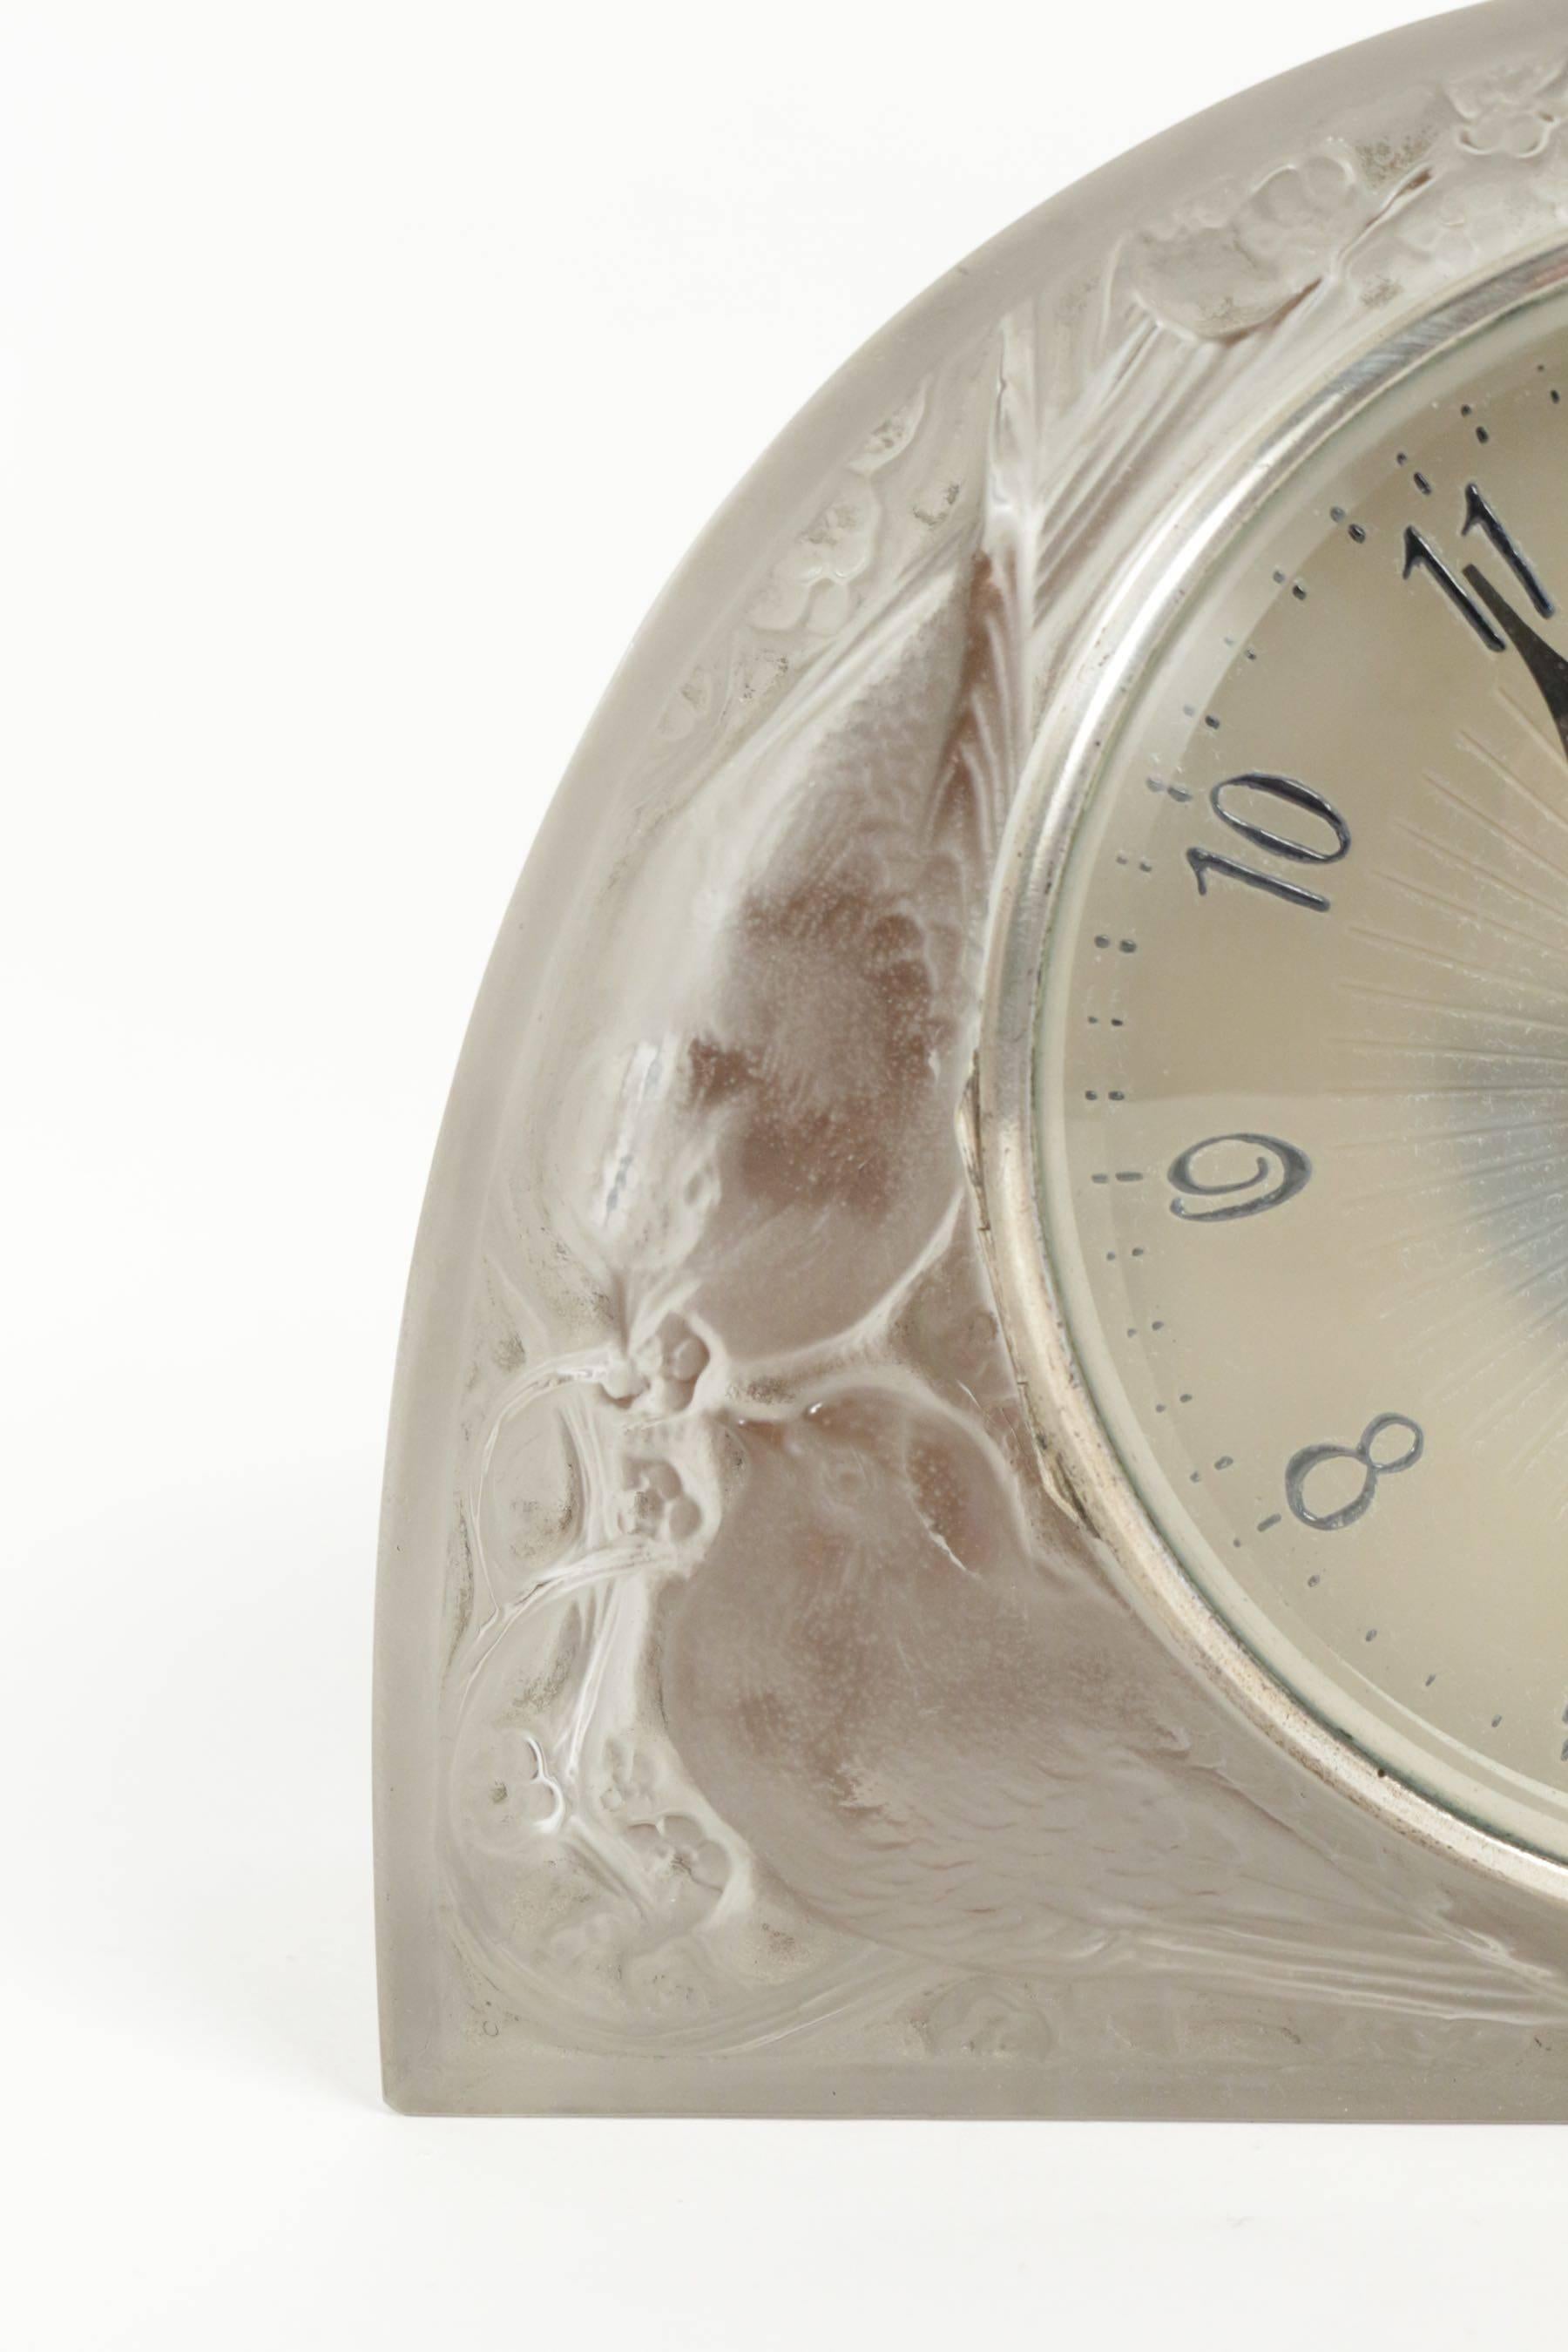 Lalique Pendule - For Sale on 1stDibs